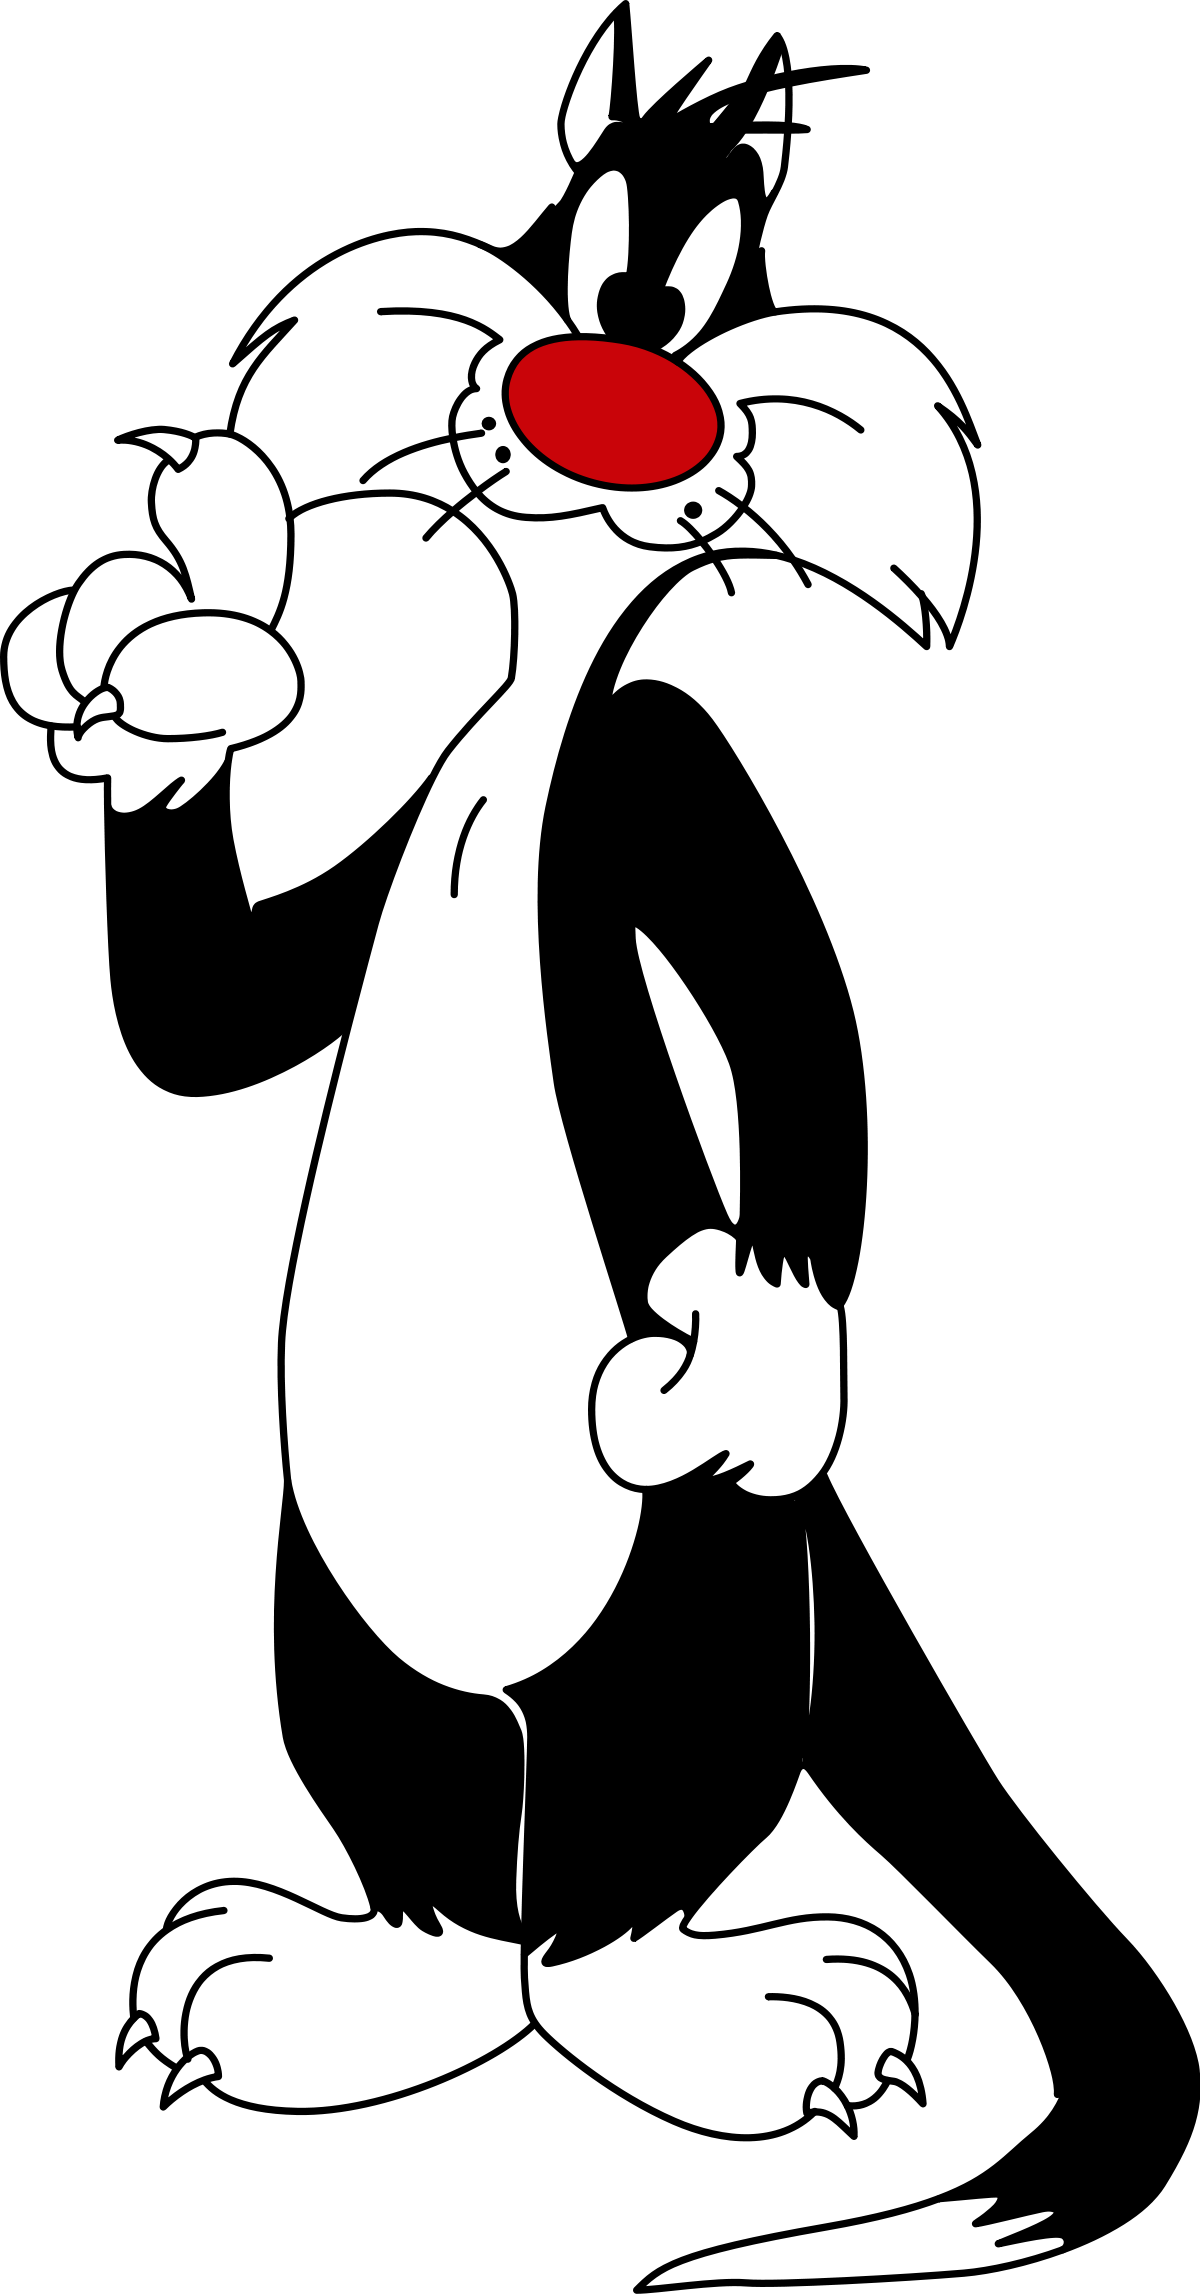 Sylvester the Cat - Wikipedia